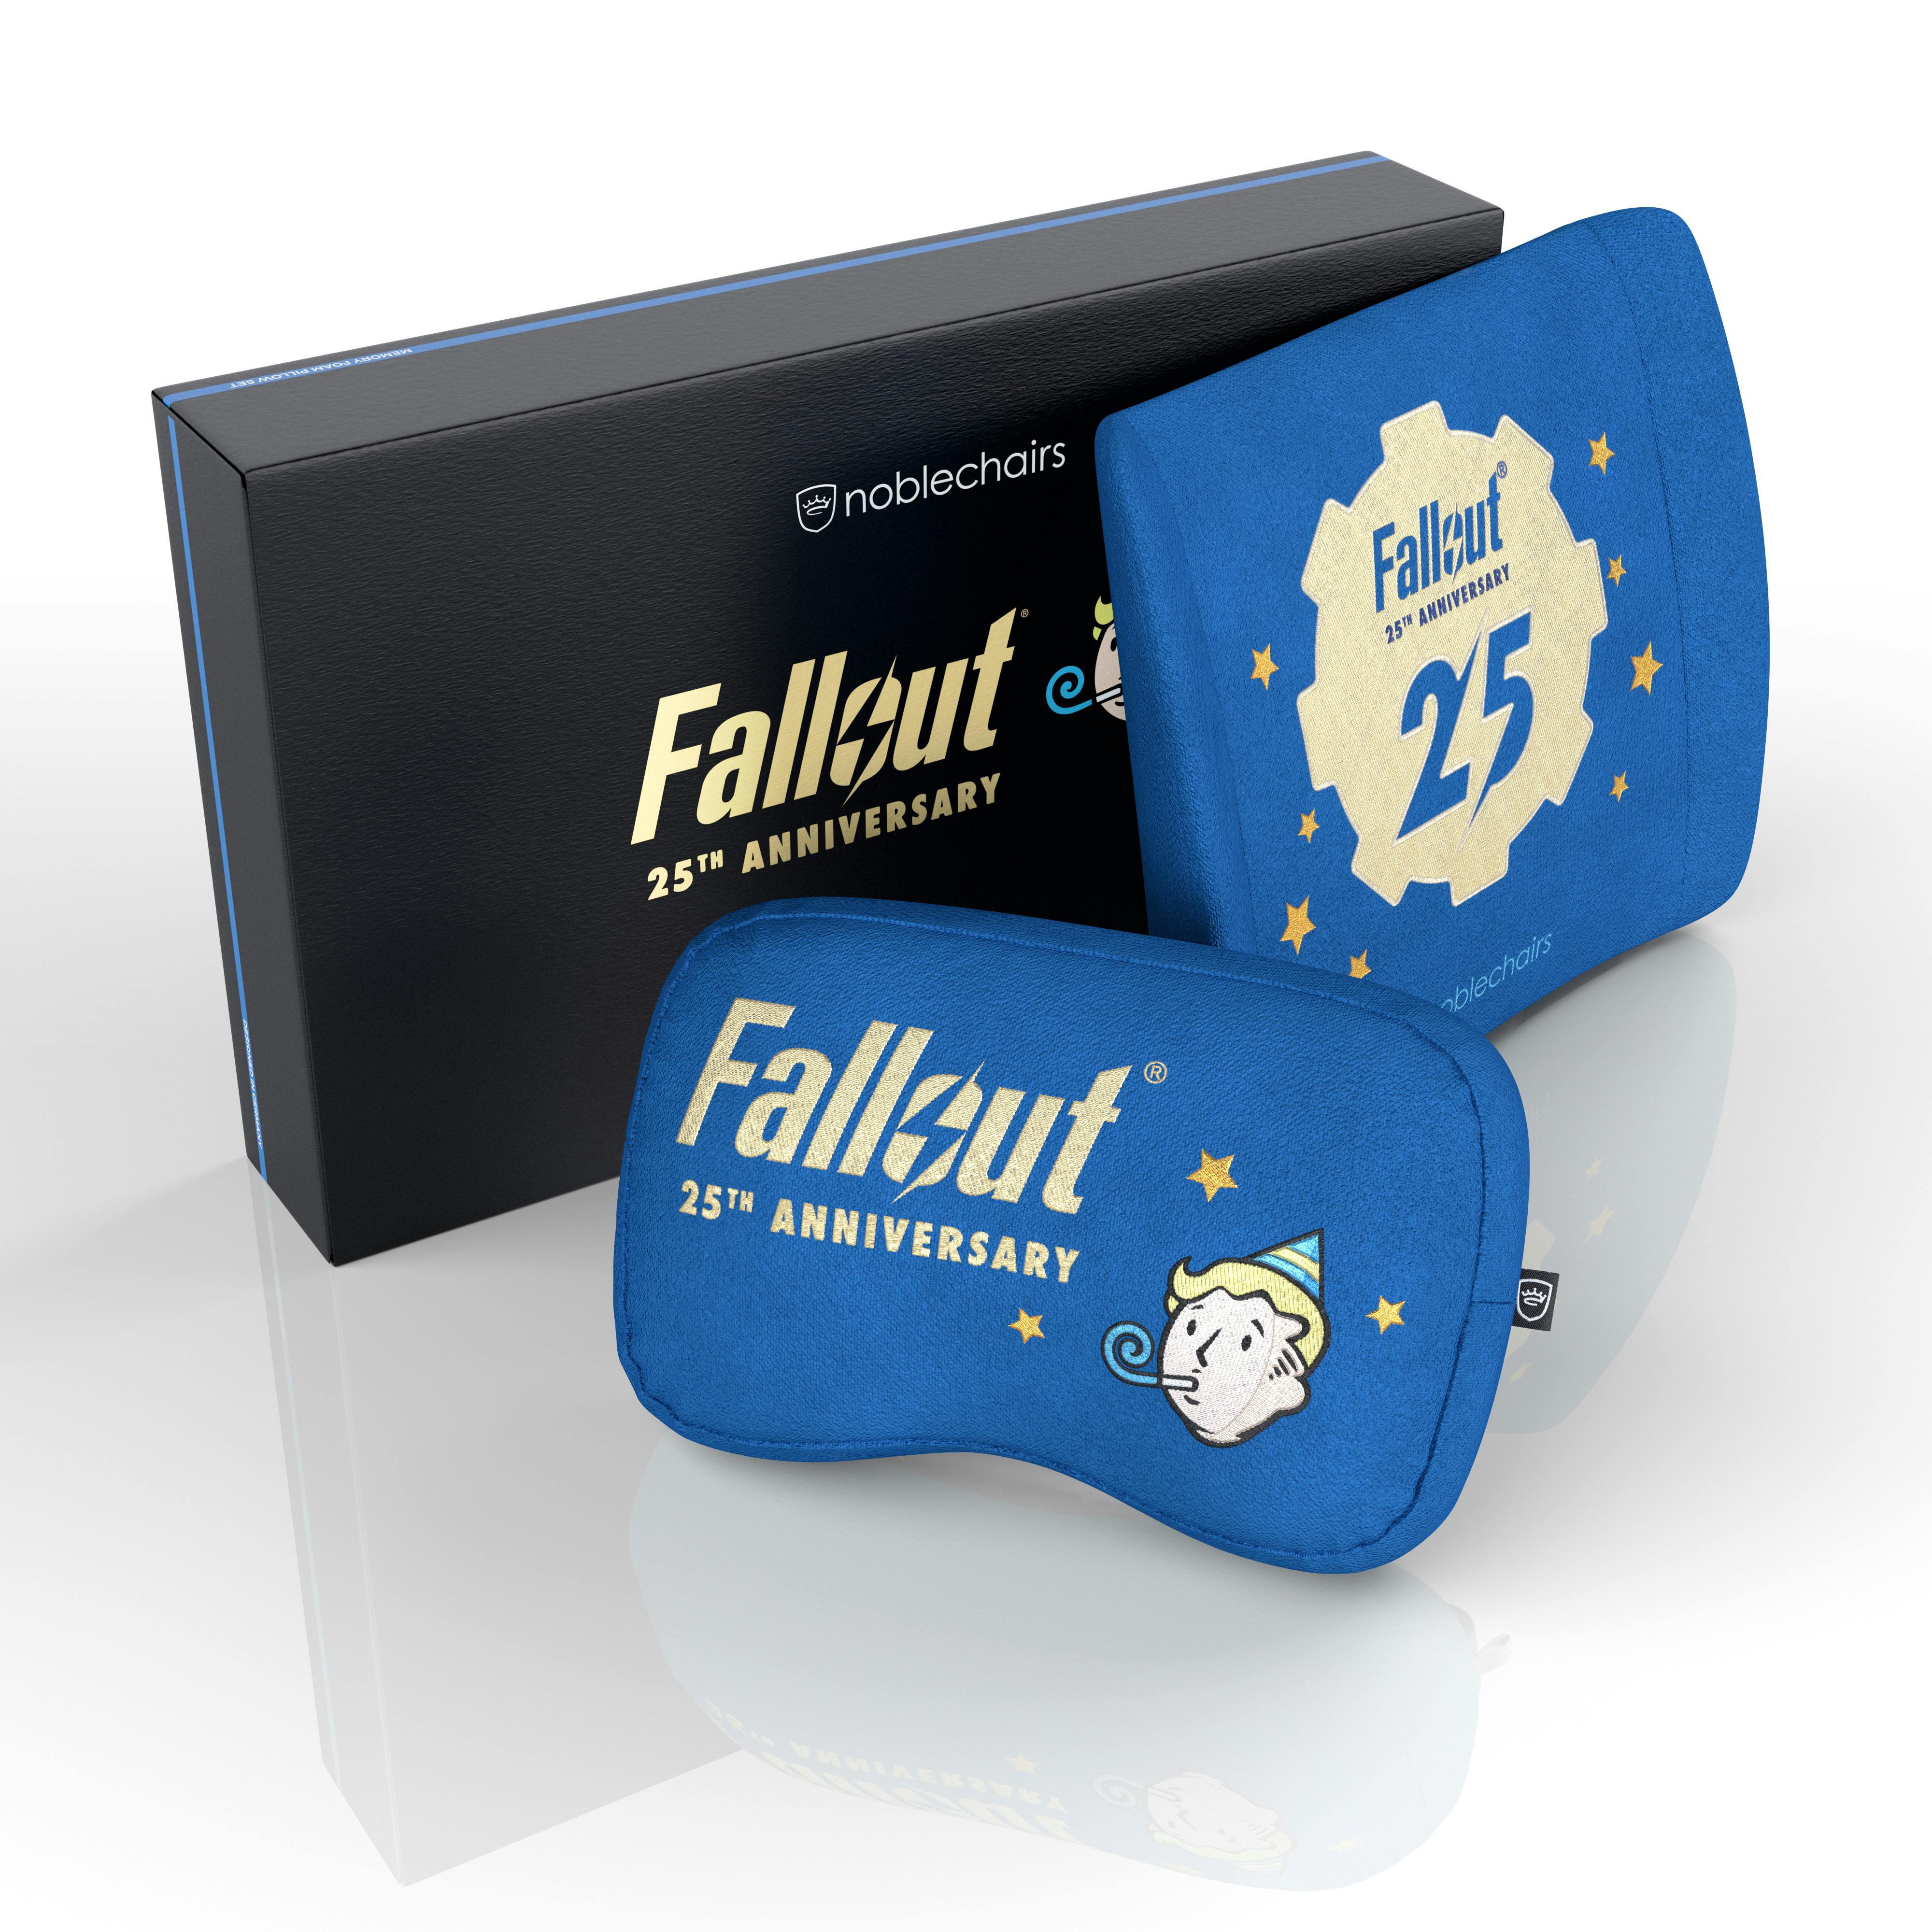 Fallout 25th Anniversary Edition kussenset
